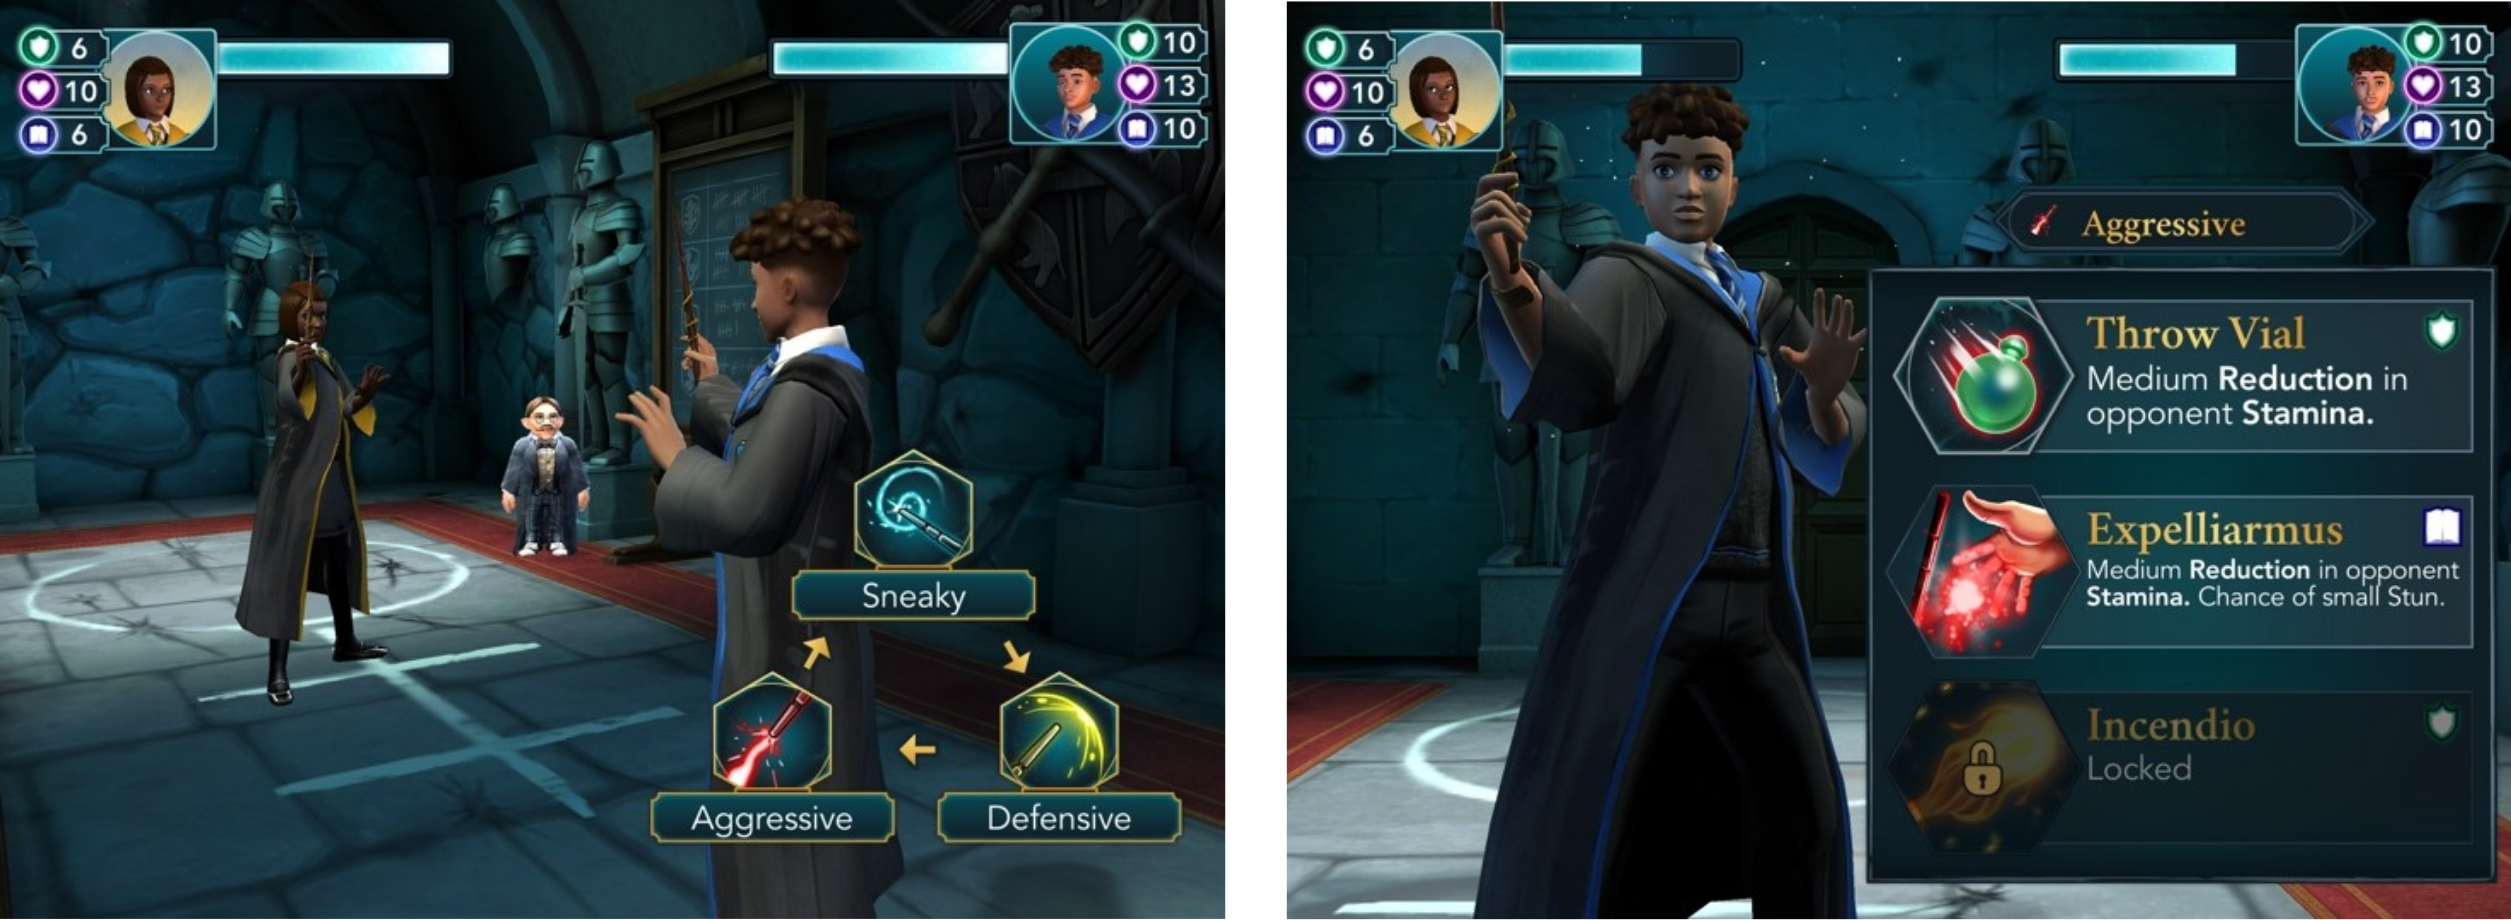 "Duelling Club" in Harry Potter: Hogwarts Mystery